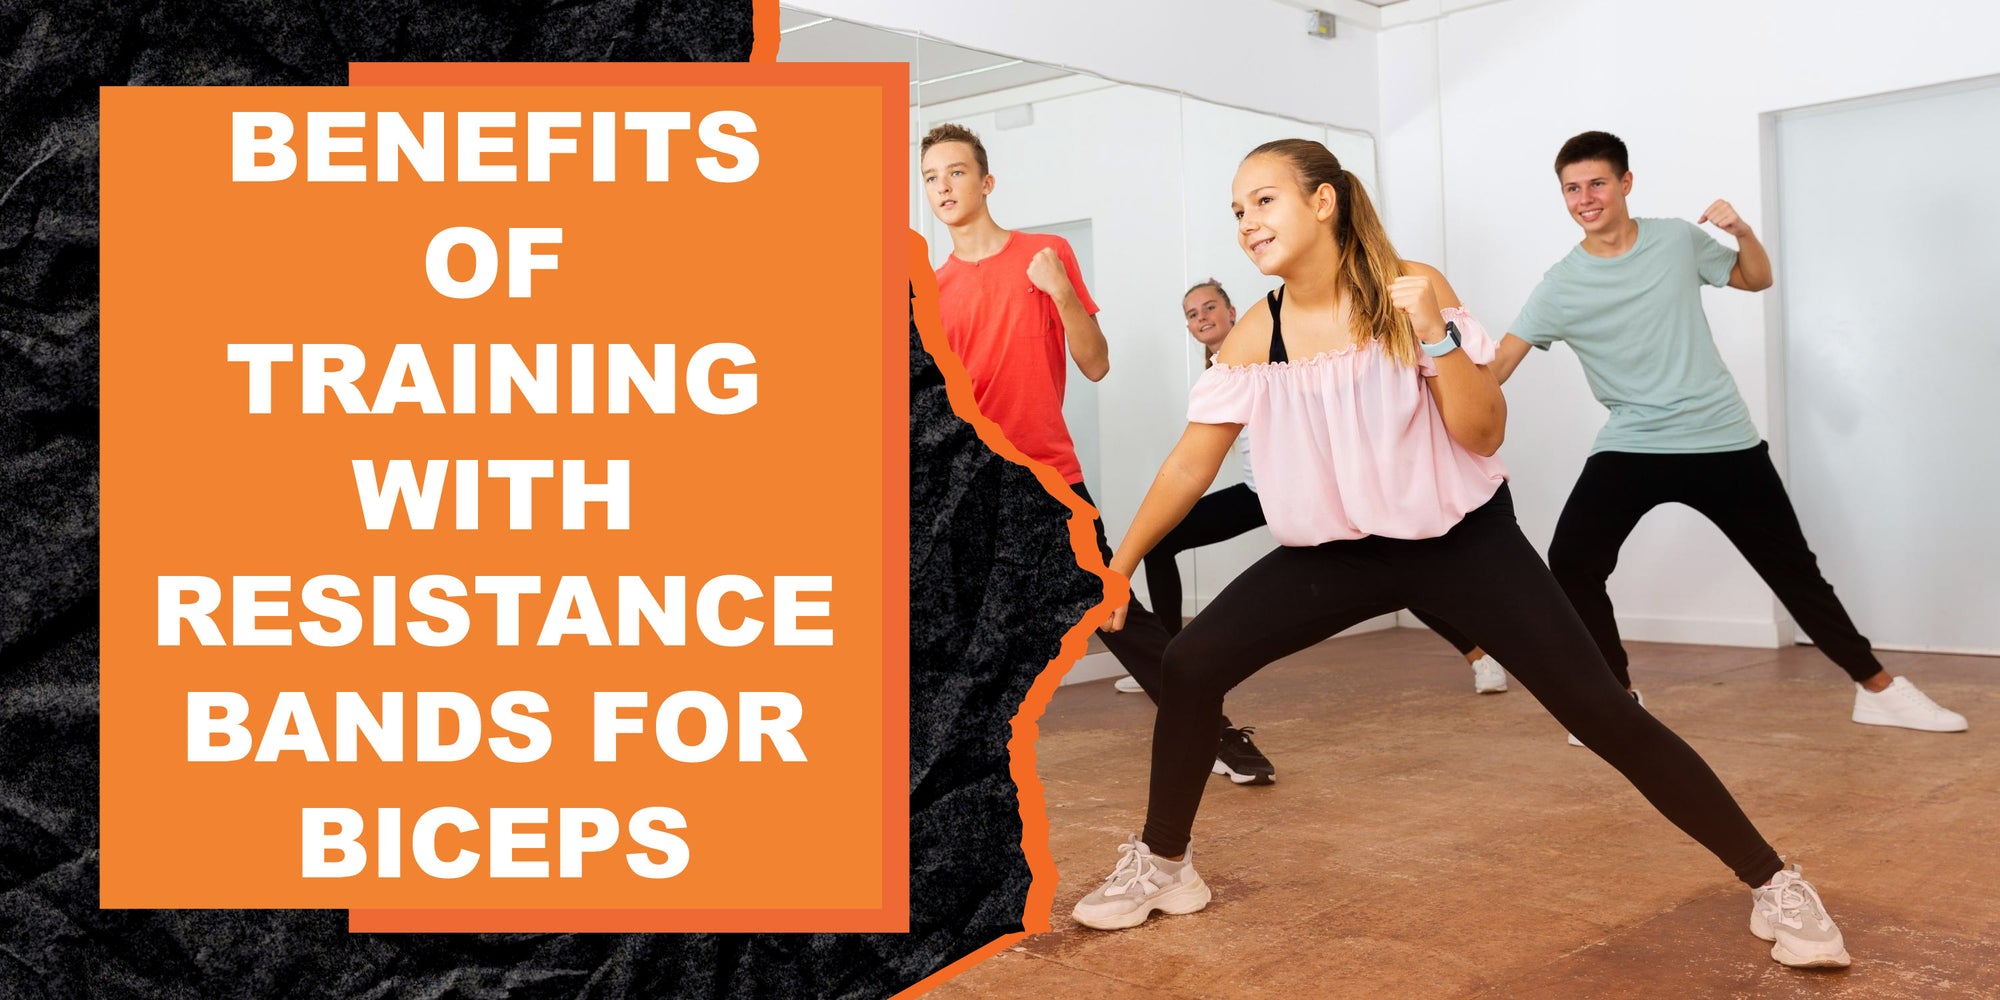 The Benefits of Training with Resistance Bands for Bicep Growth